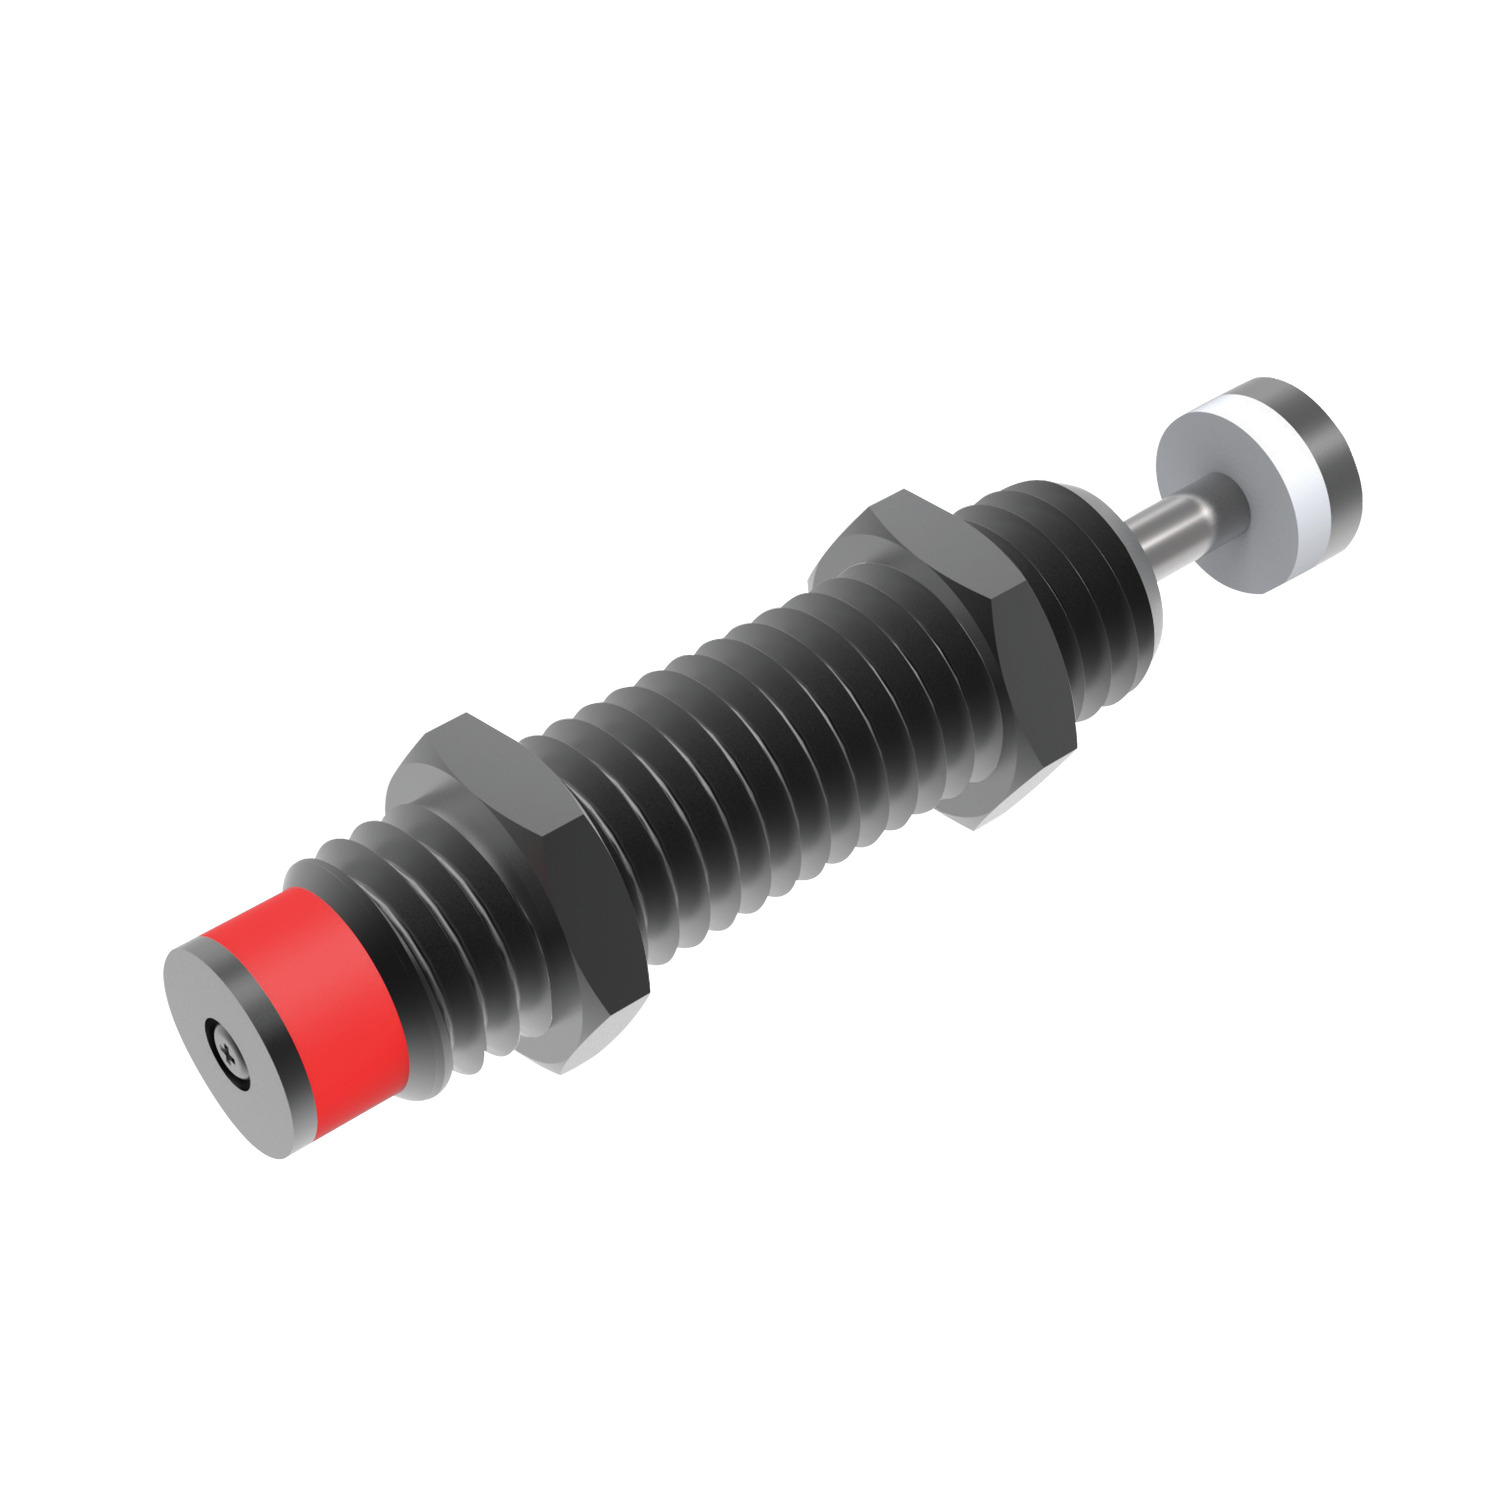 Shock Absorber Self Compensating Self compensating fixed shock absorbers are consistent and reliable dampening force to linear deceleration, throughout entire impact stroke.